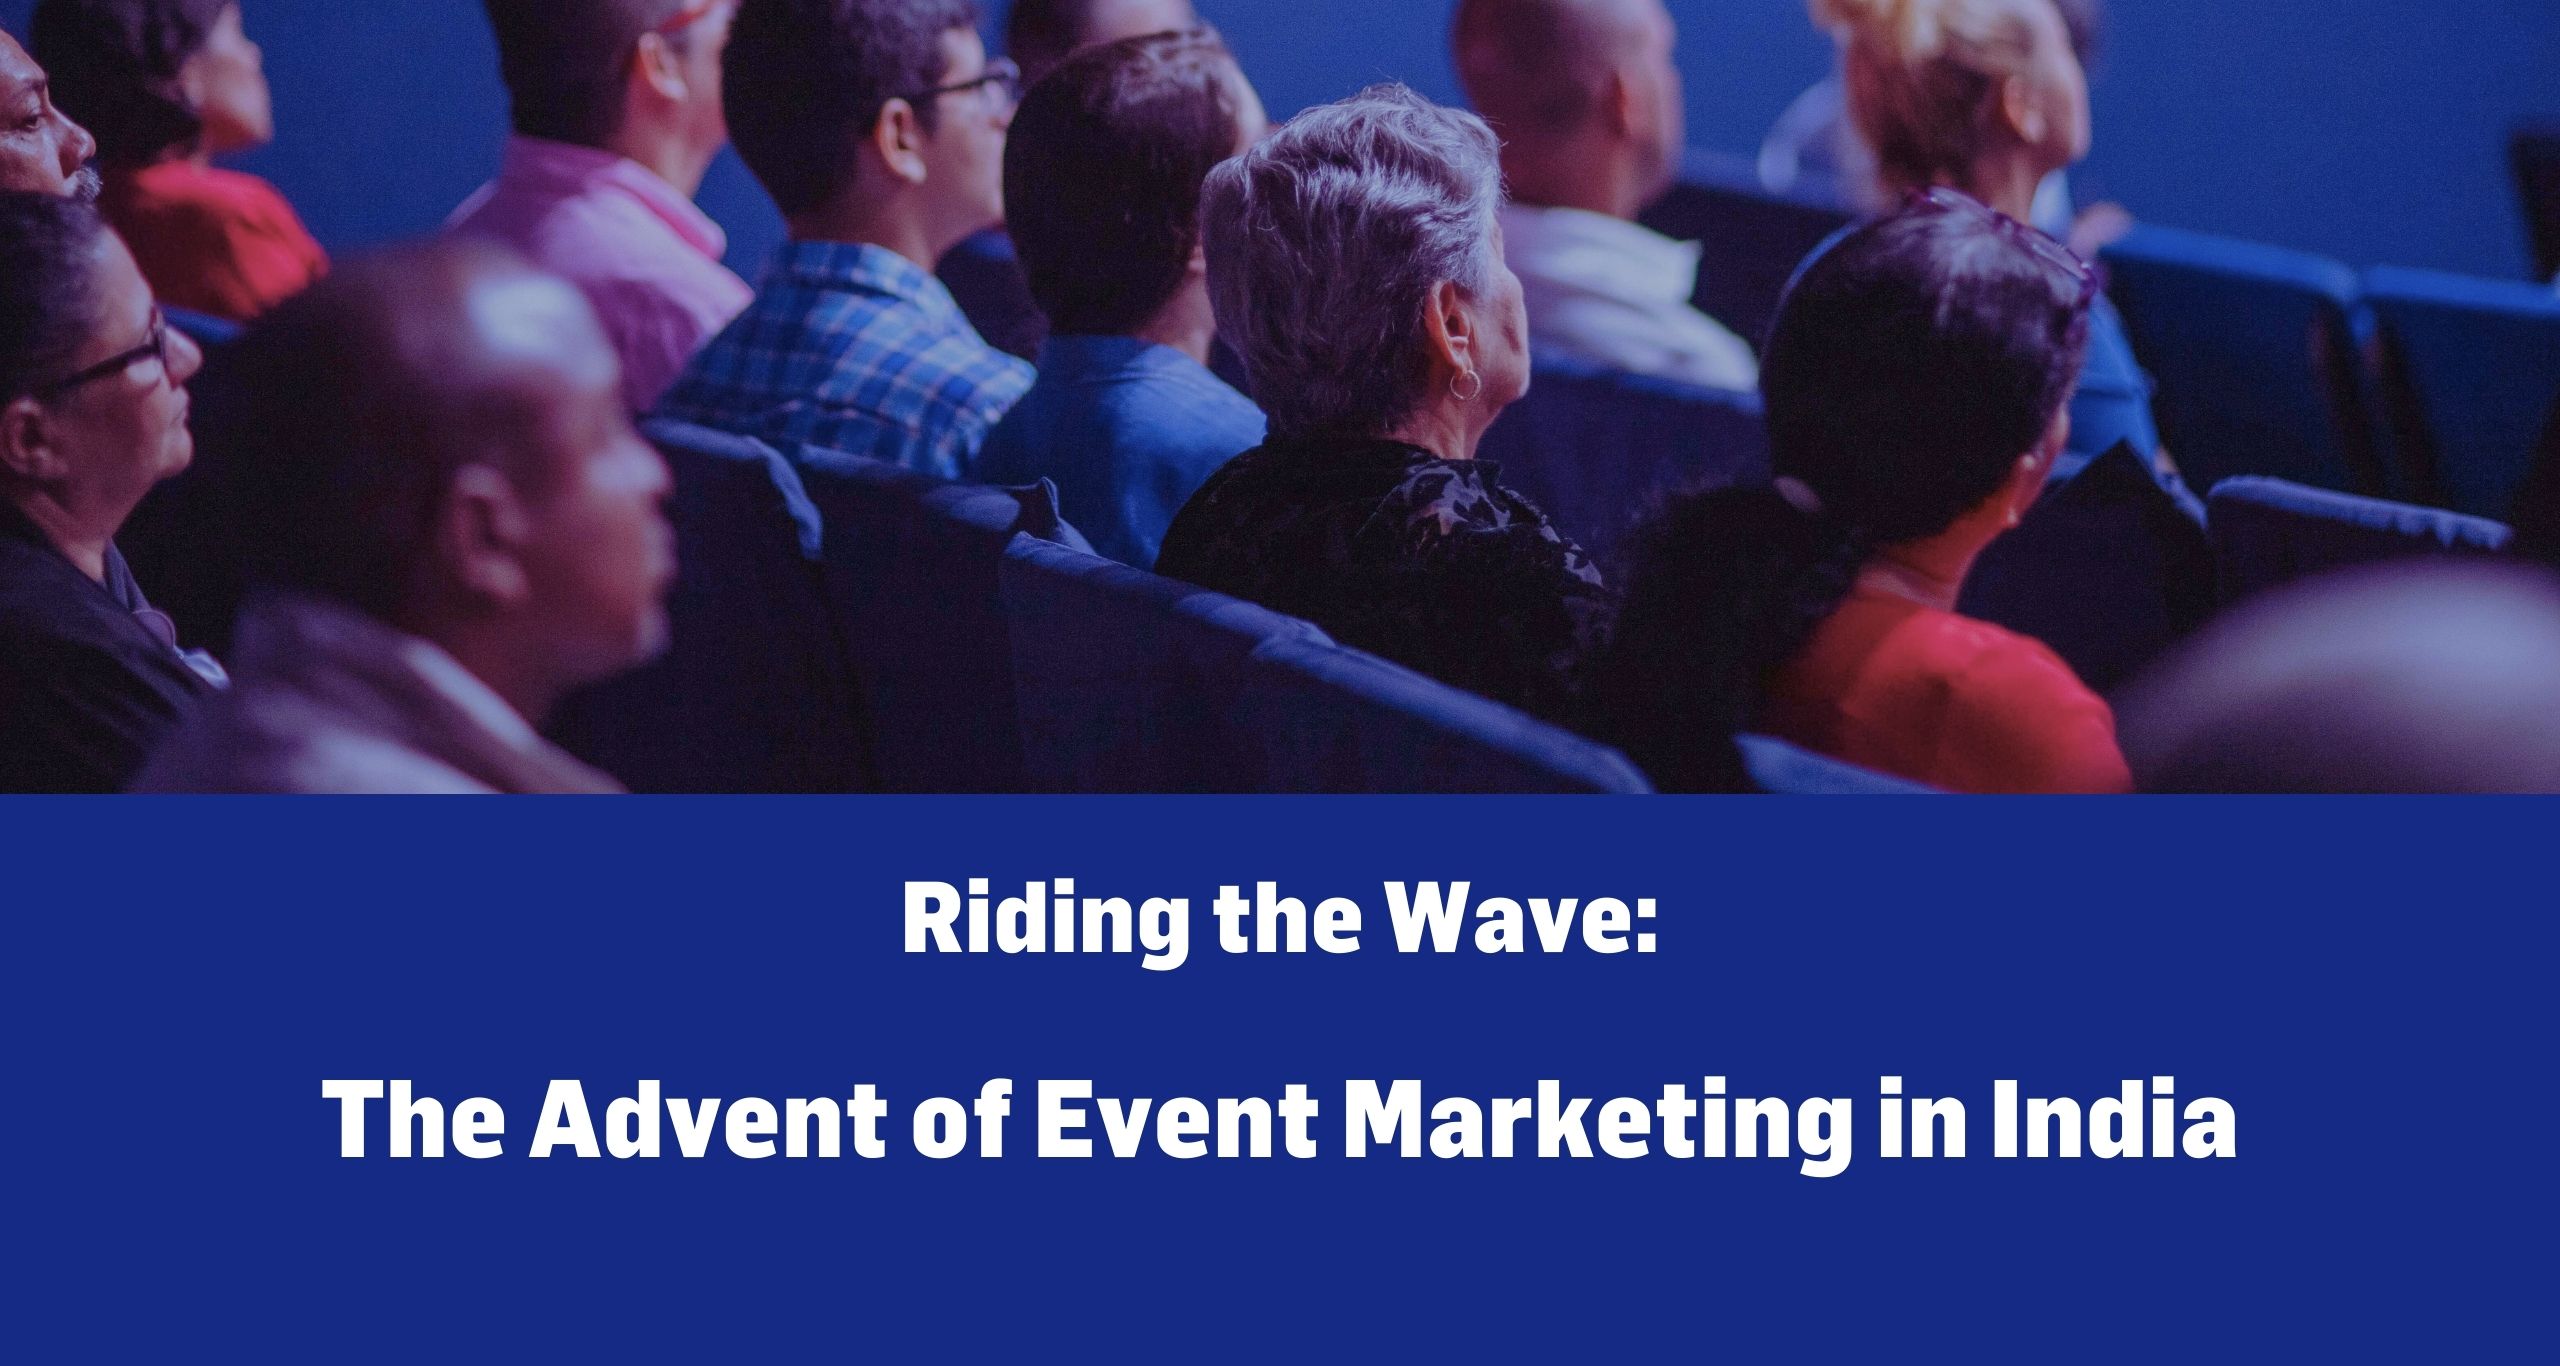 Riding the Wave: The Advent of Event Marketing in India